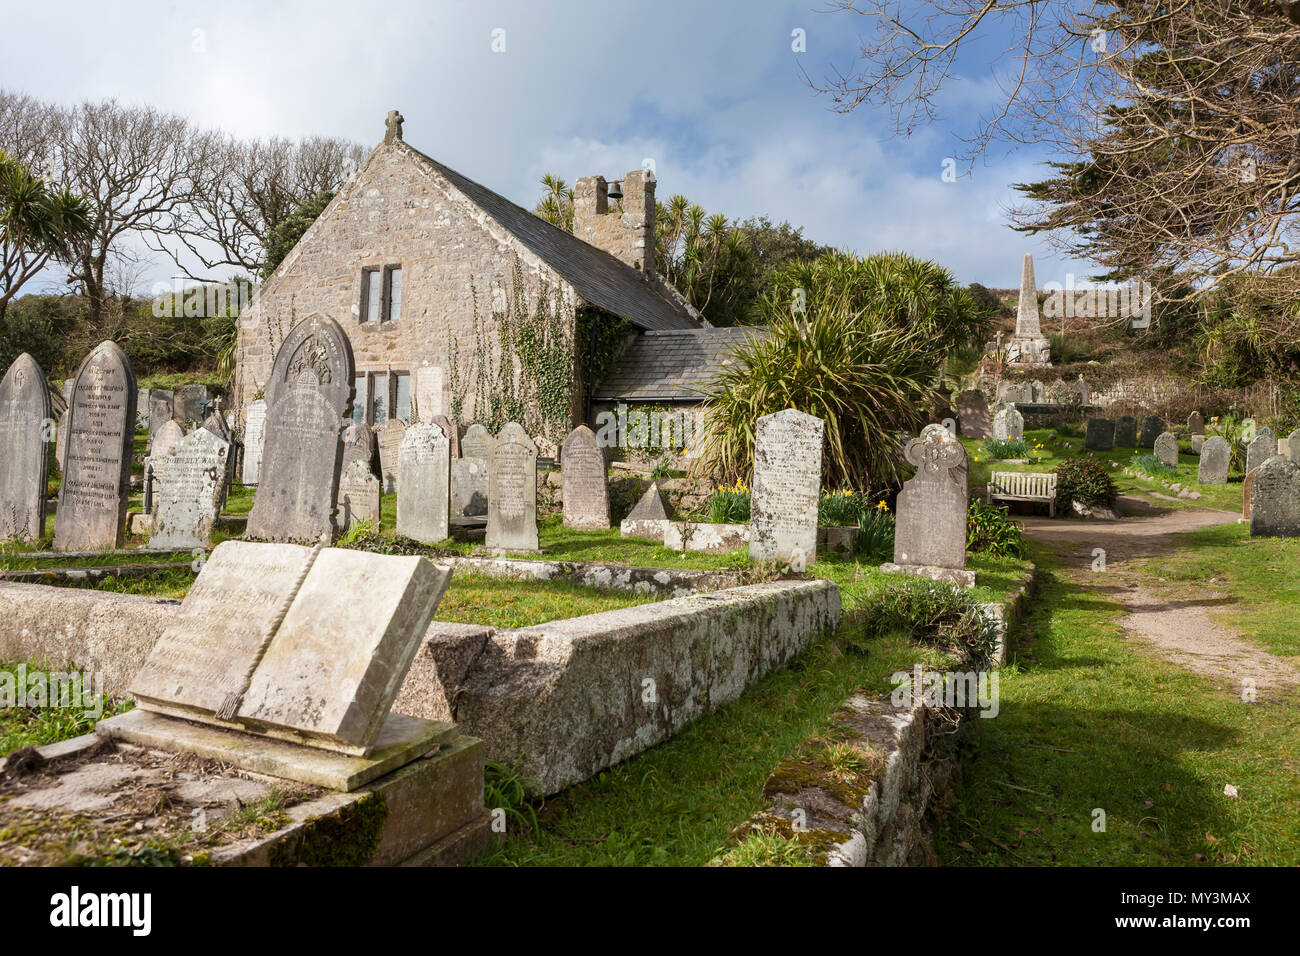 St Mary's Old Church and churchyard, St. Mary's, Isles of Scilly, UKp Stock Photo